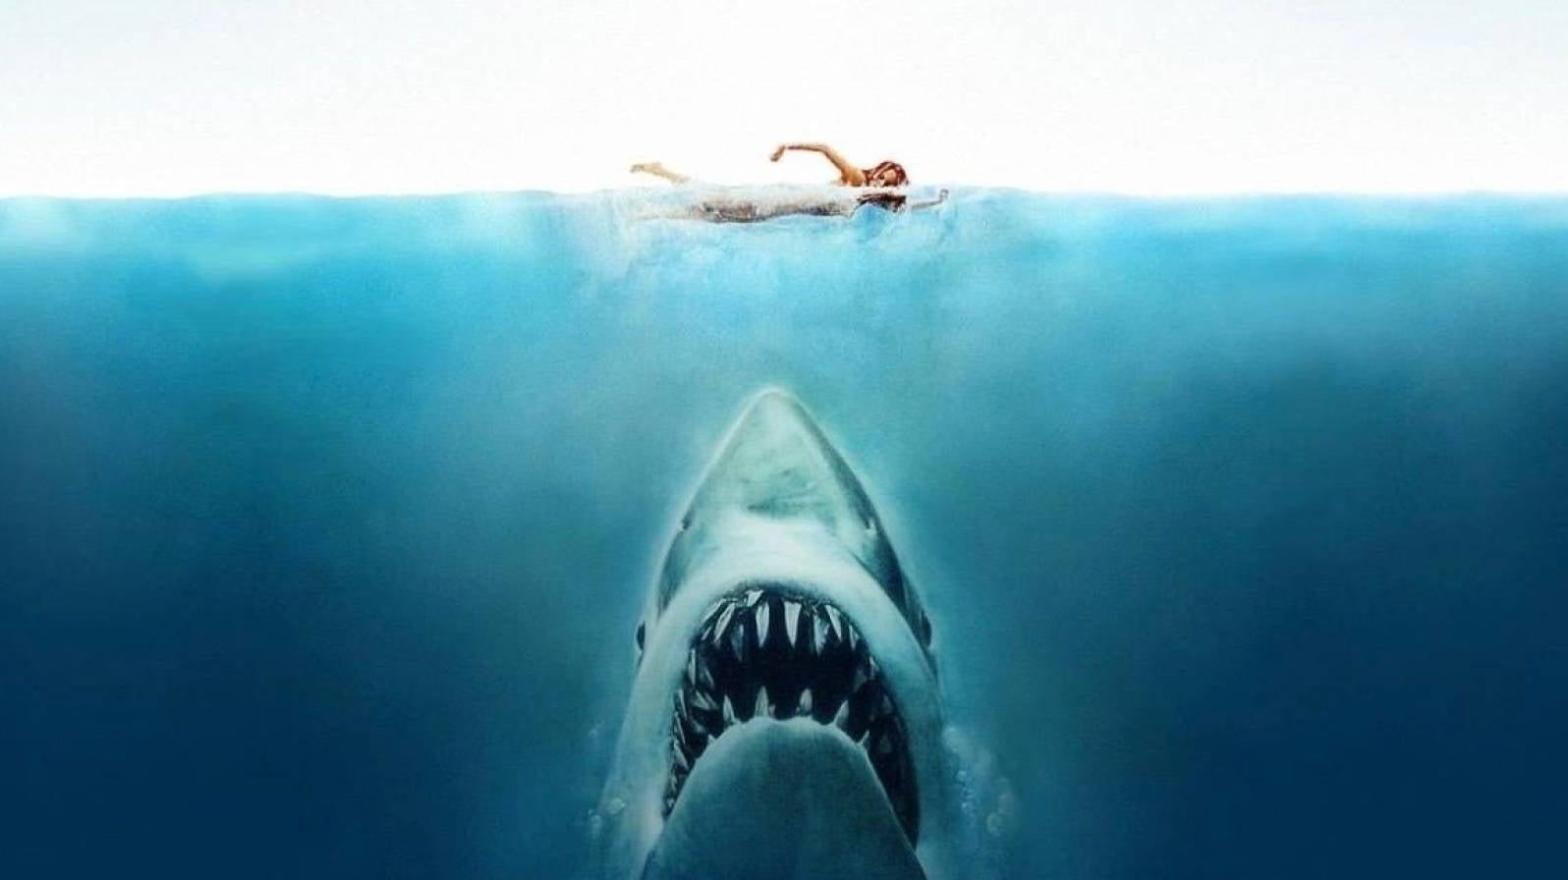 Jaws promotional image (Image: Universal Pictures)